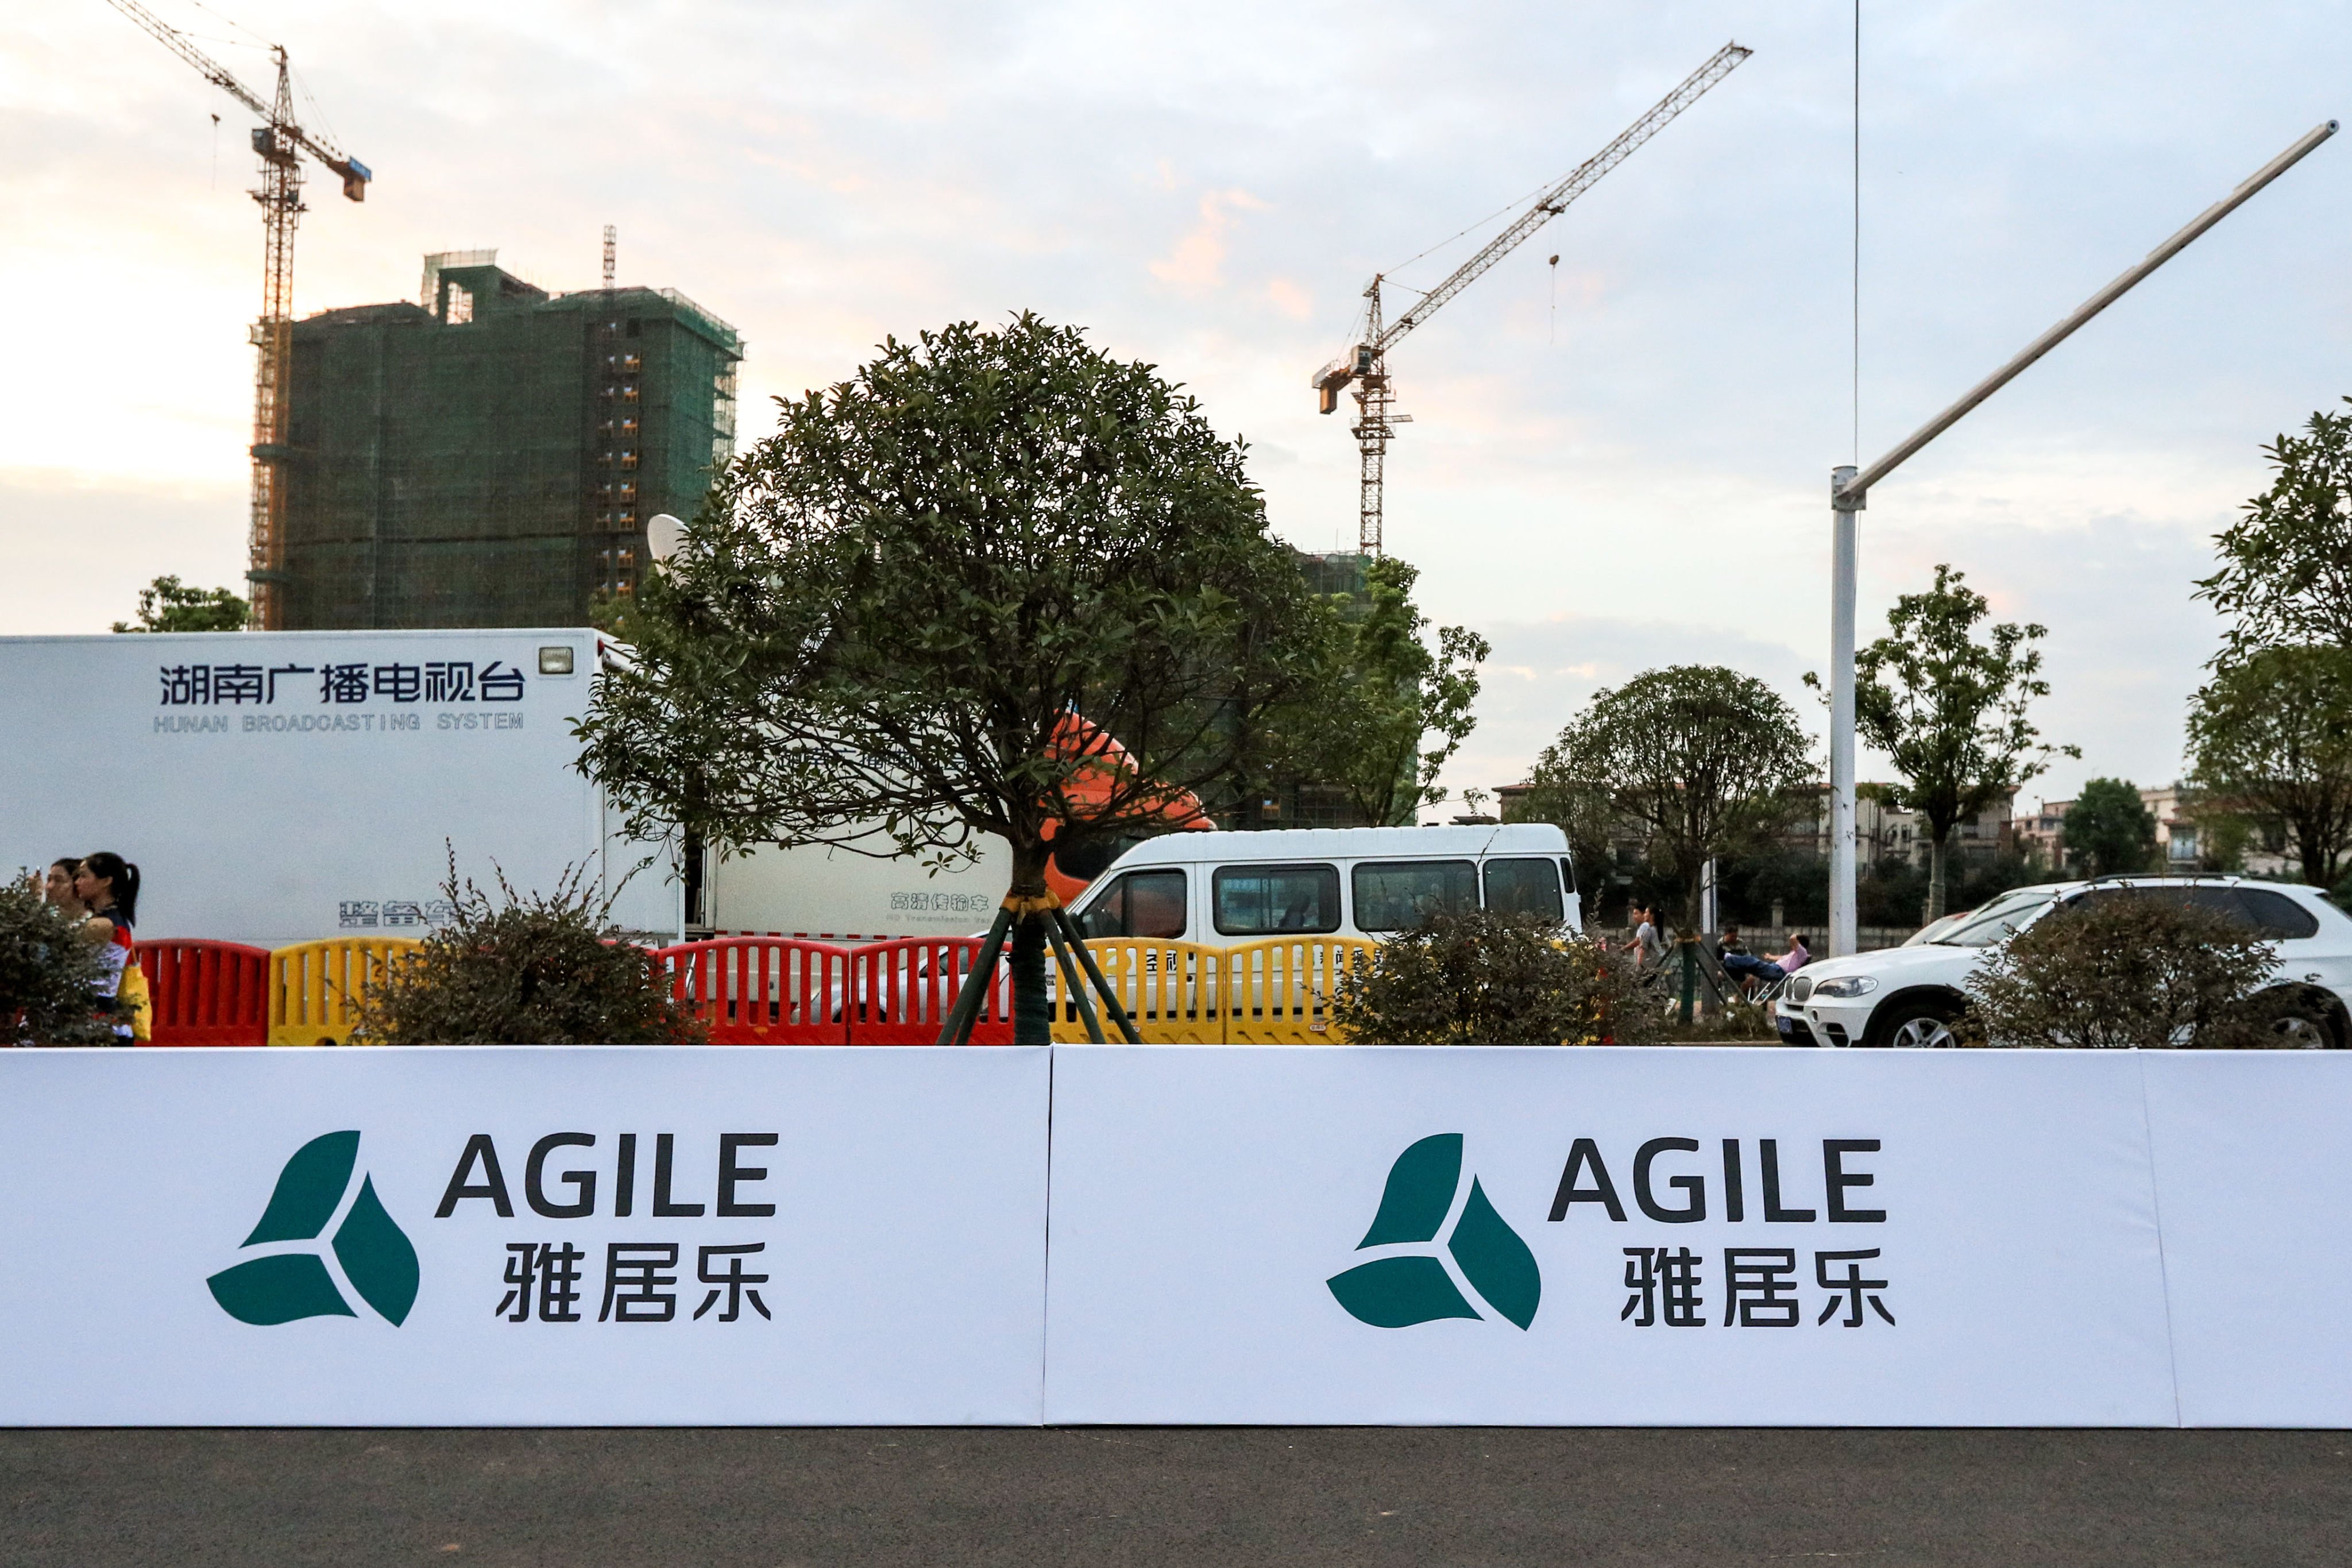 Agile Group Holdings said it has missed an interest payment on an offshore bond. Photo: Imaginechina via AFP